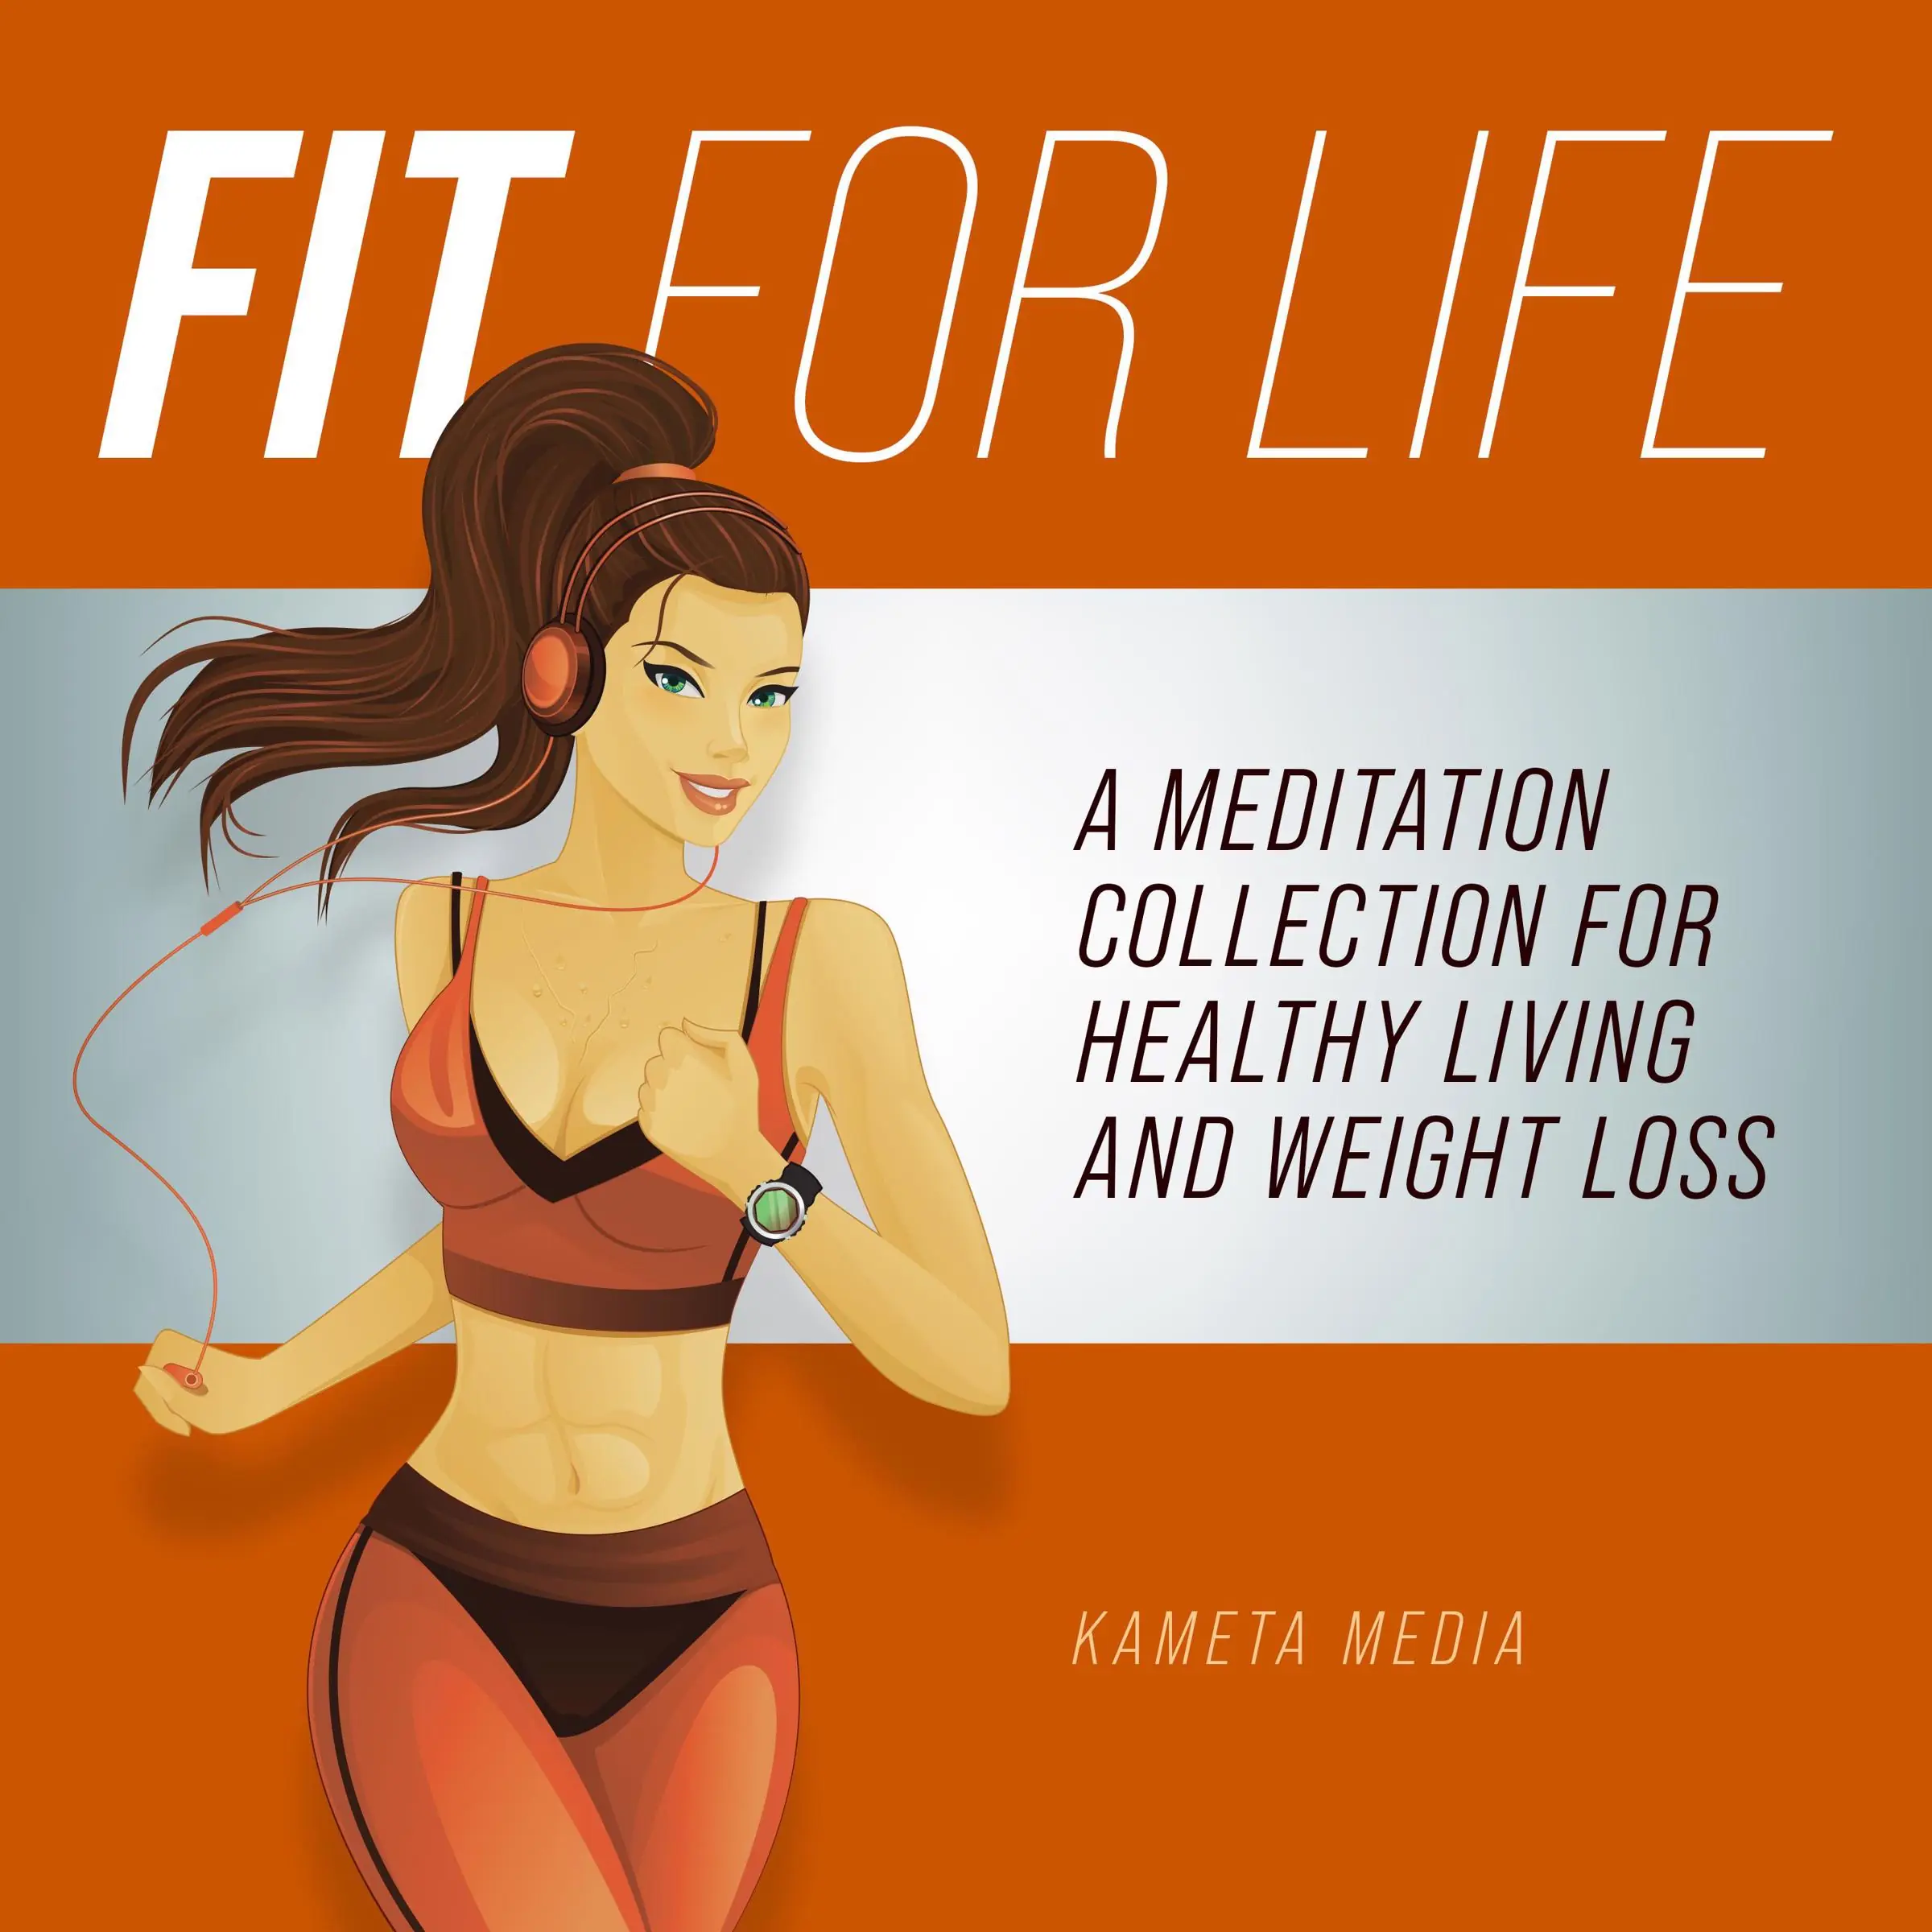 Fit for Life: A Meditation Collection for Healthy Living and Weight Loss Audiobook by Kameta Media